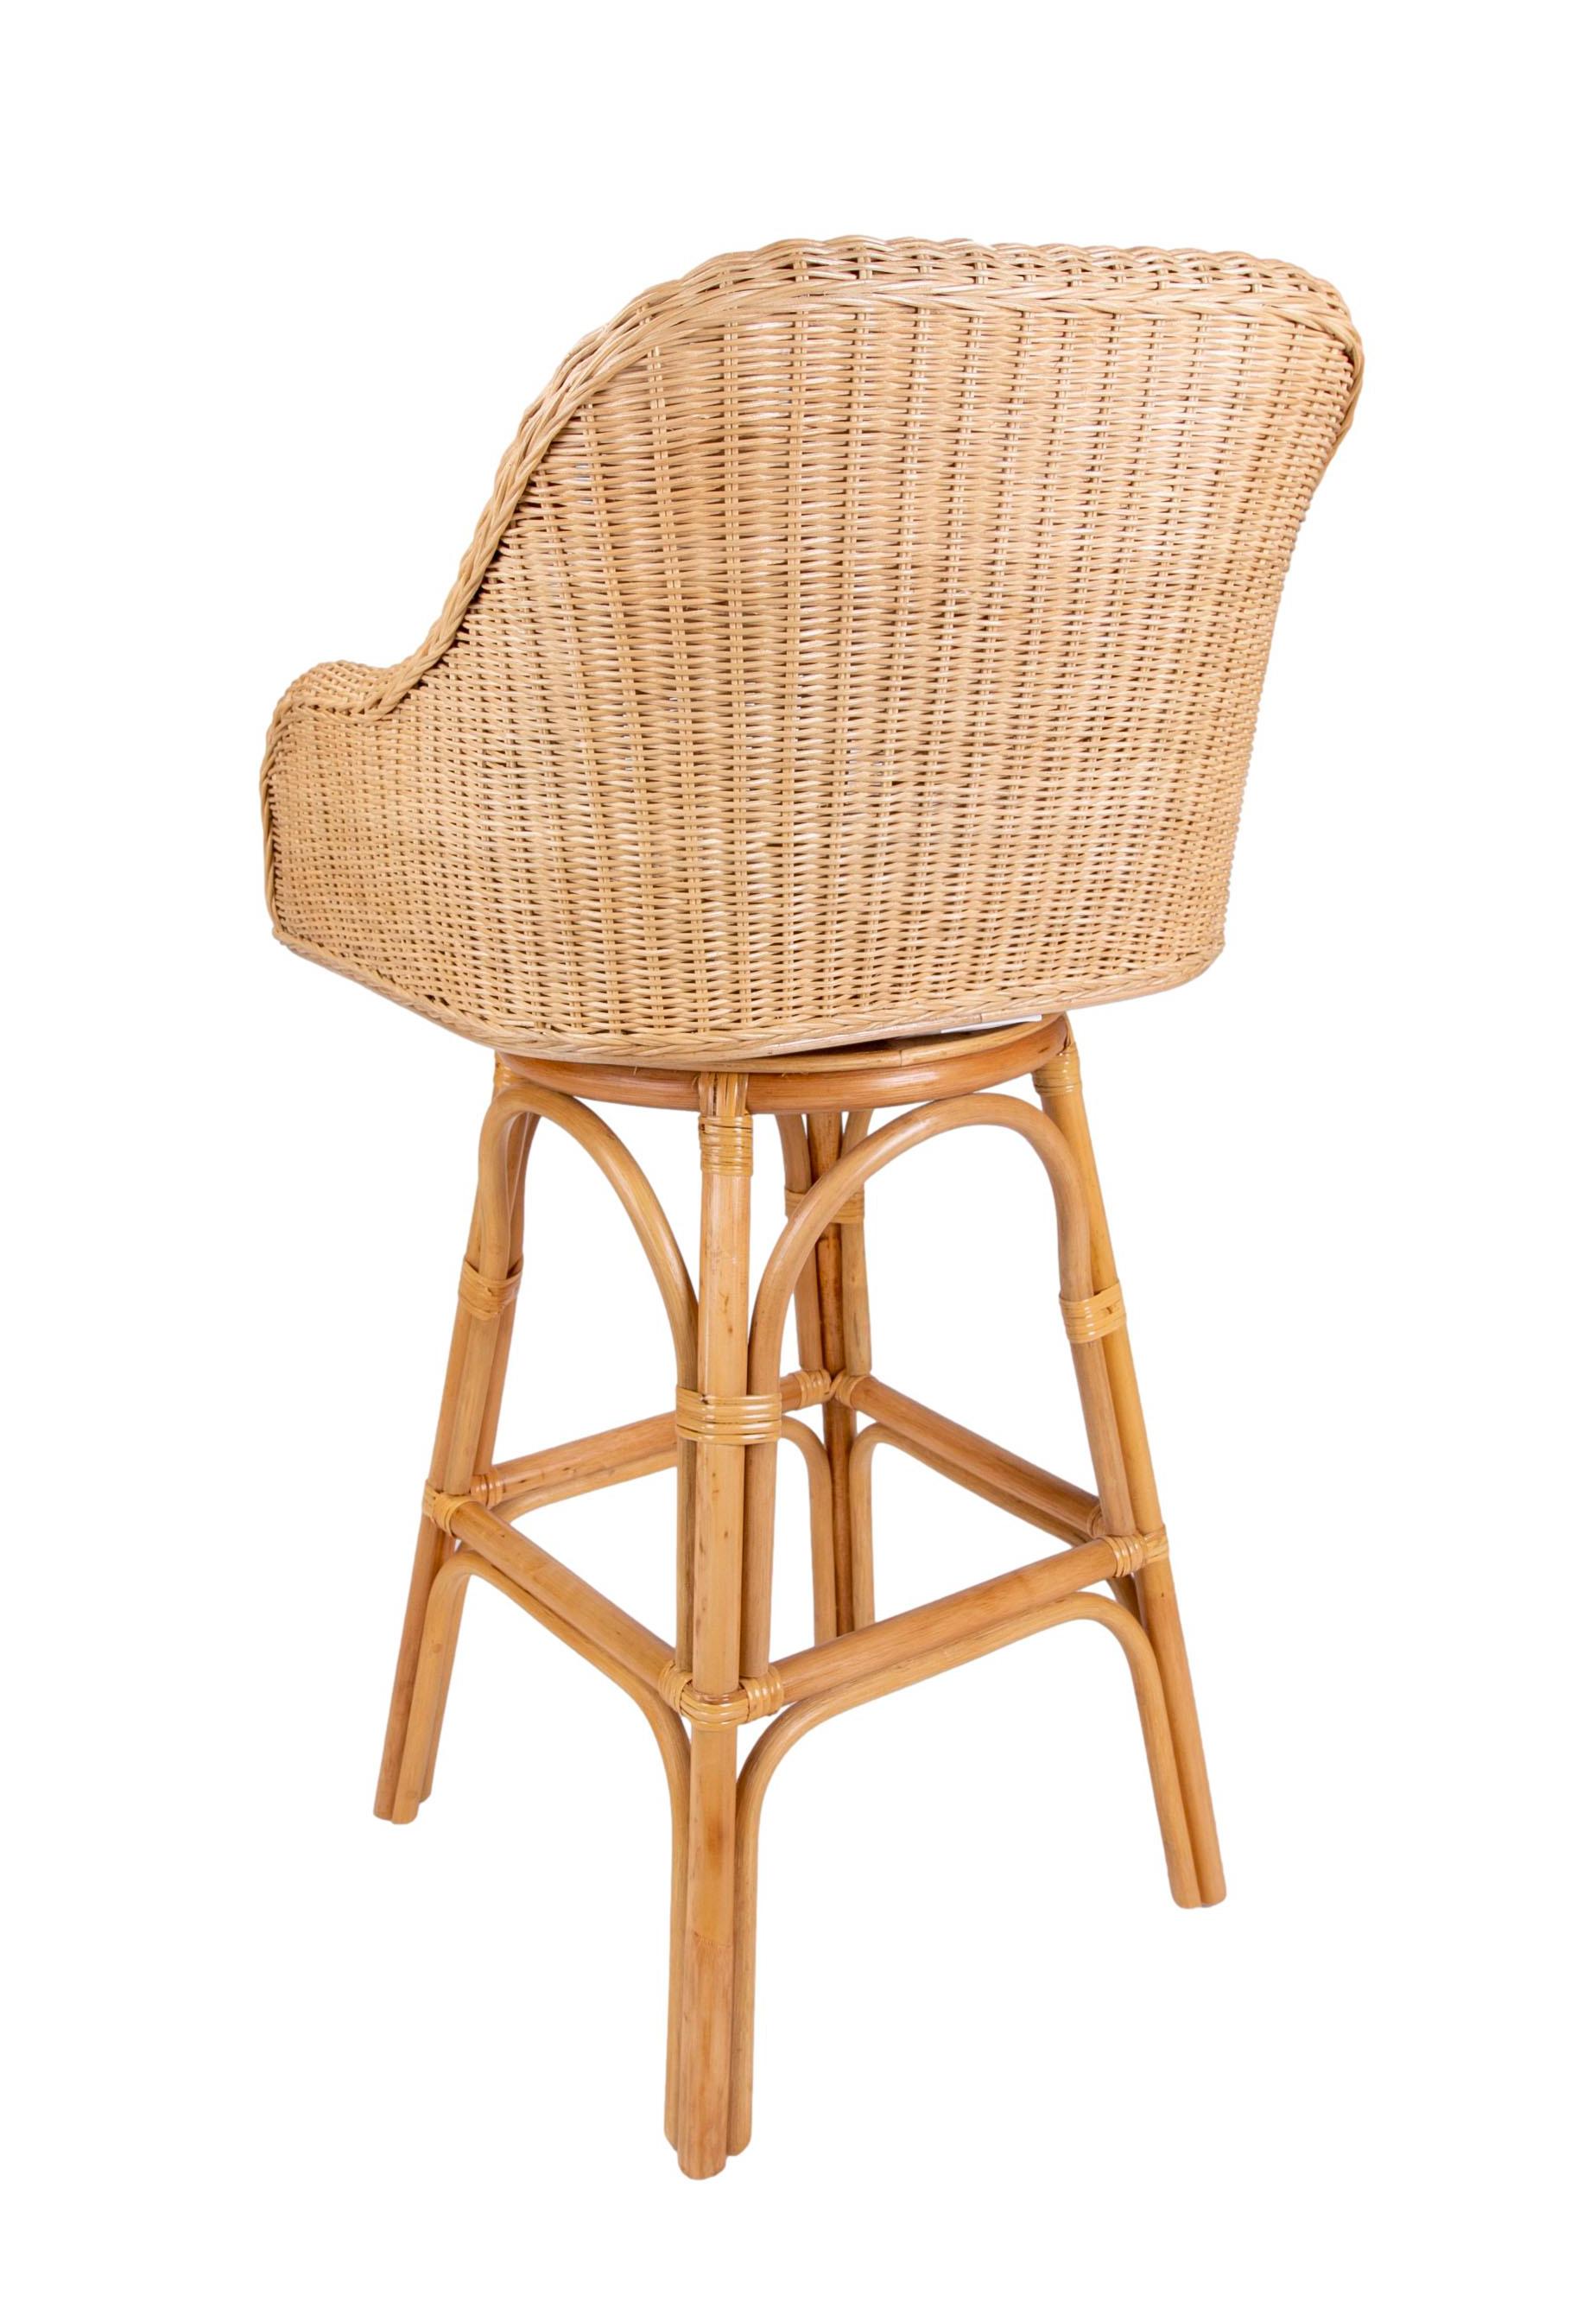 Upholstered Rattan and Wicker Bar stool with Sideways Movement 2